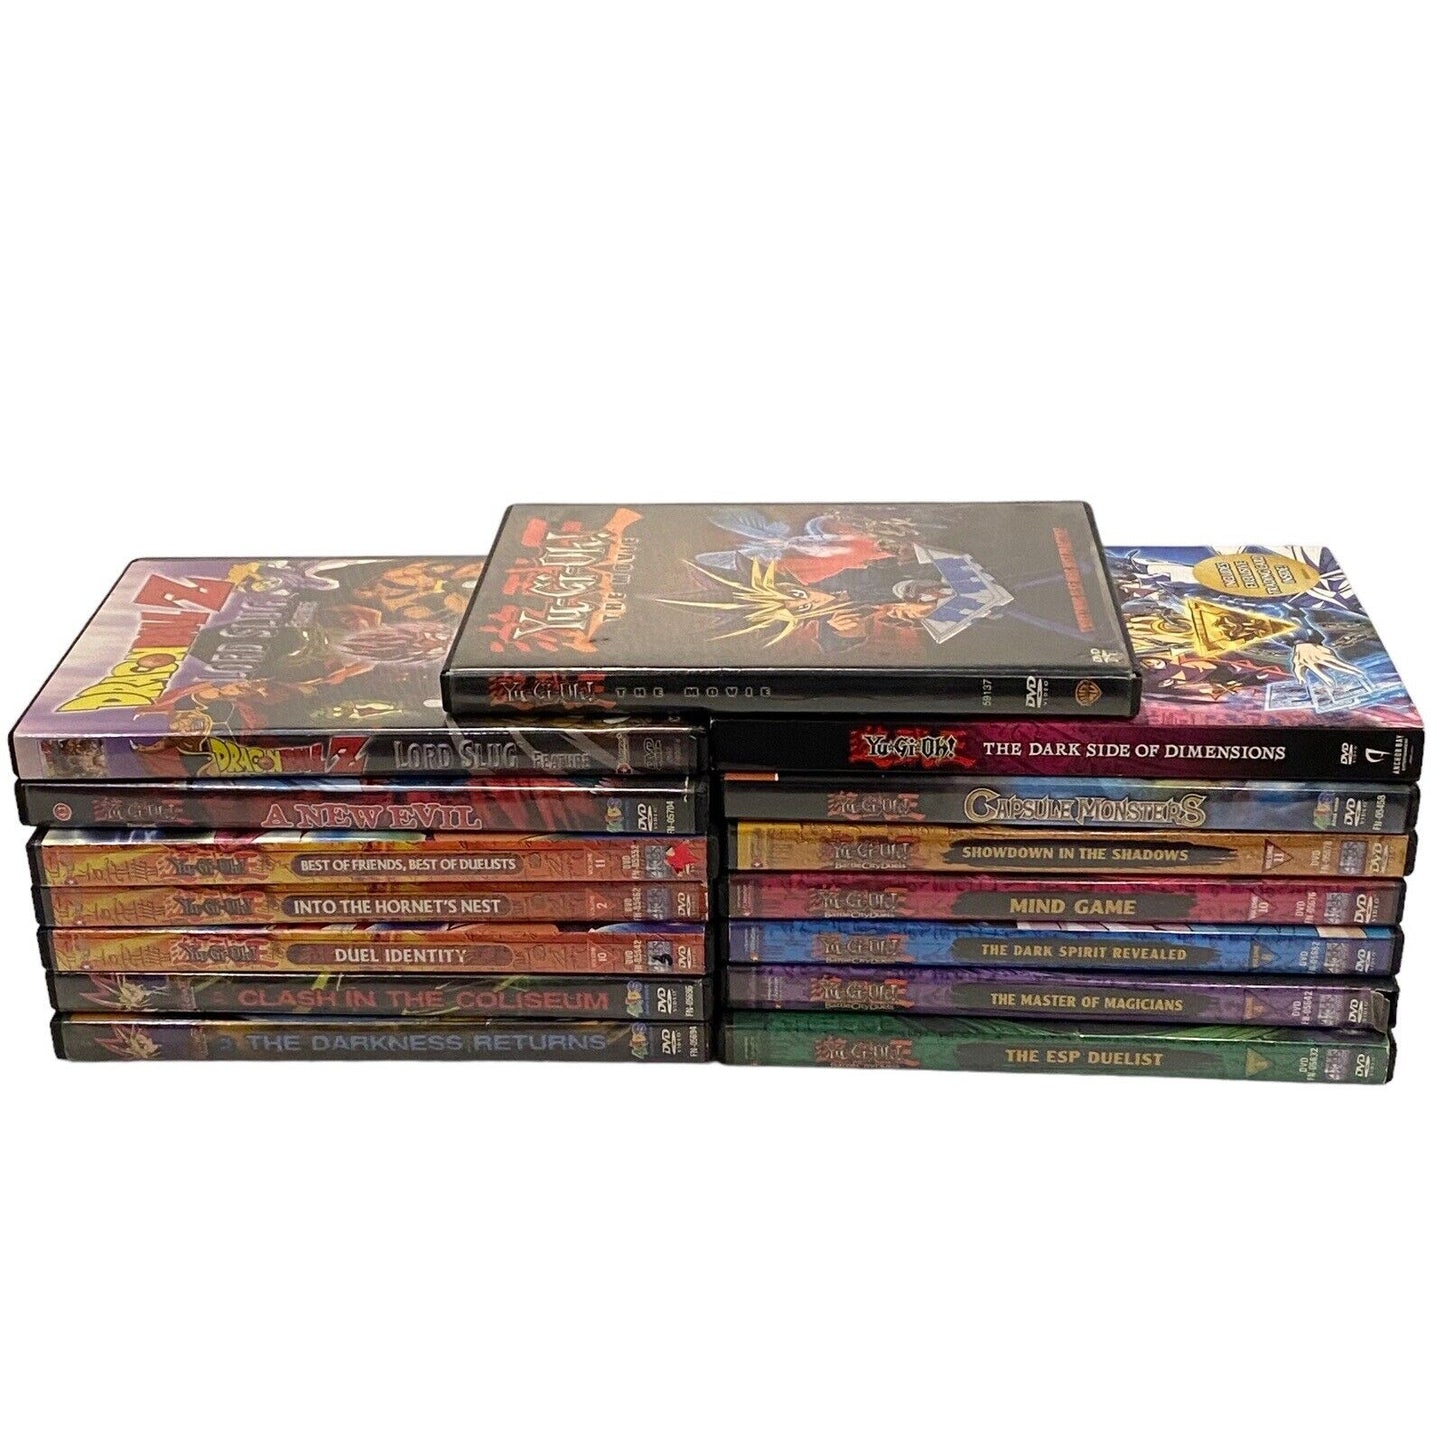 Mixed Lot 15 Anime DVDs Yu-Gi-Oh Battle City Duels Shadow Realm & Dragonball Z